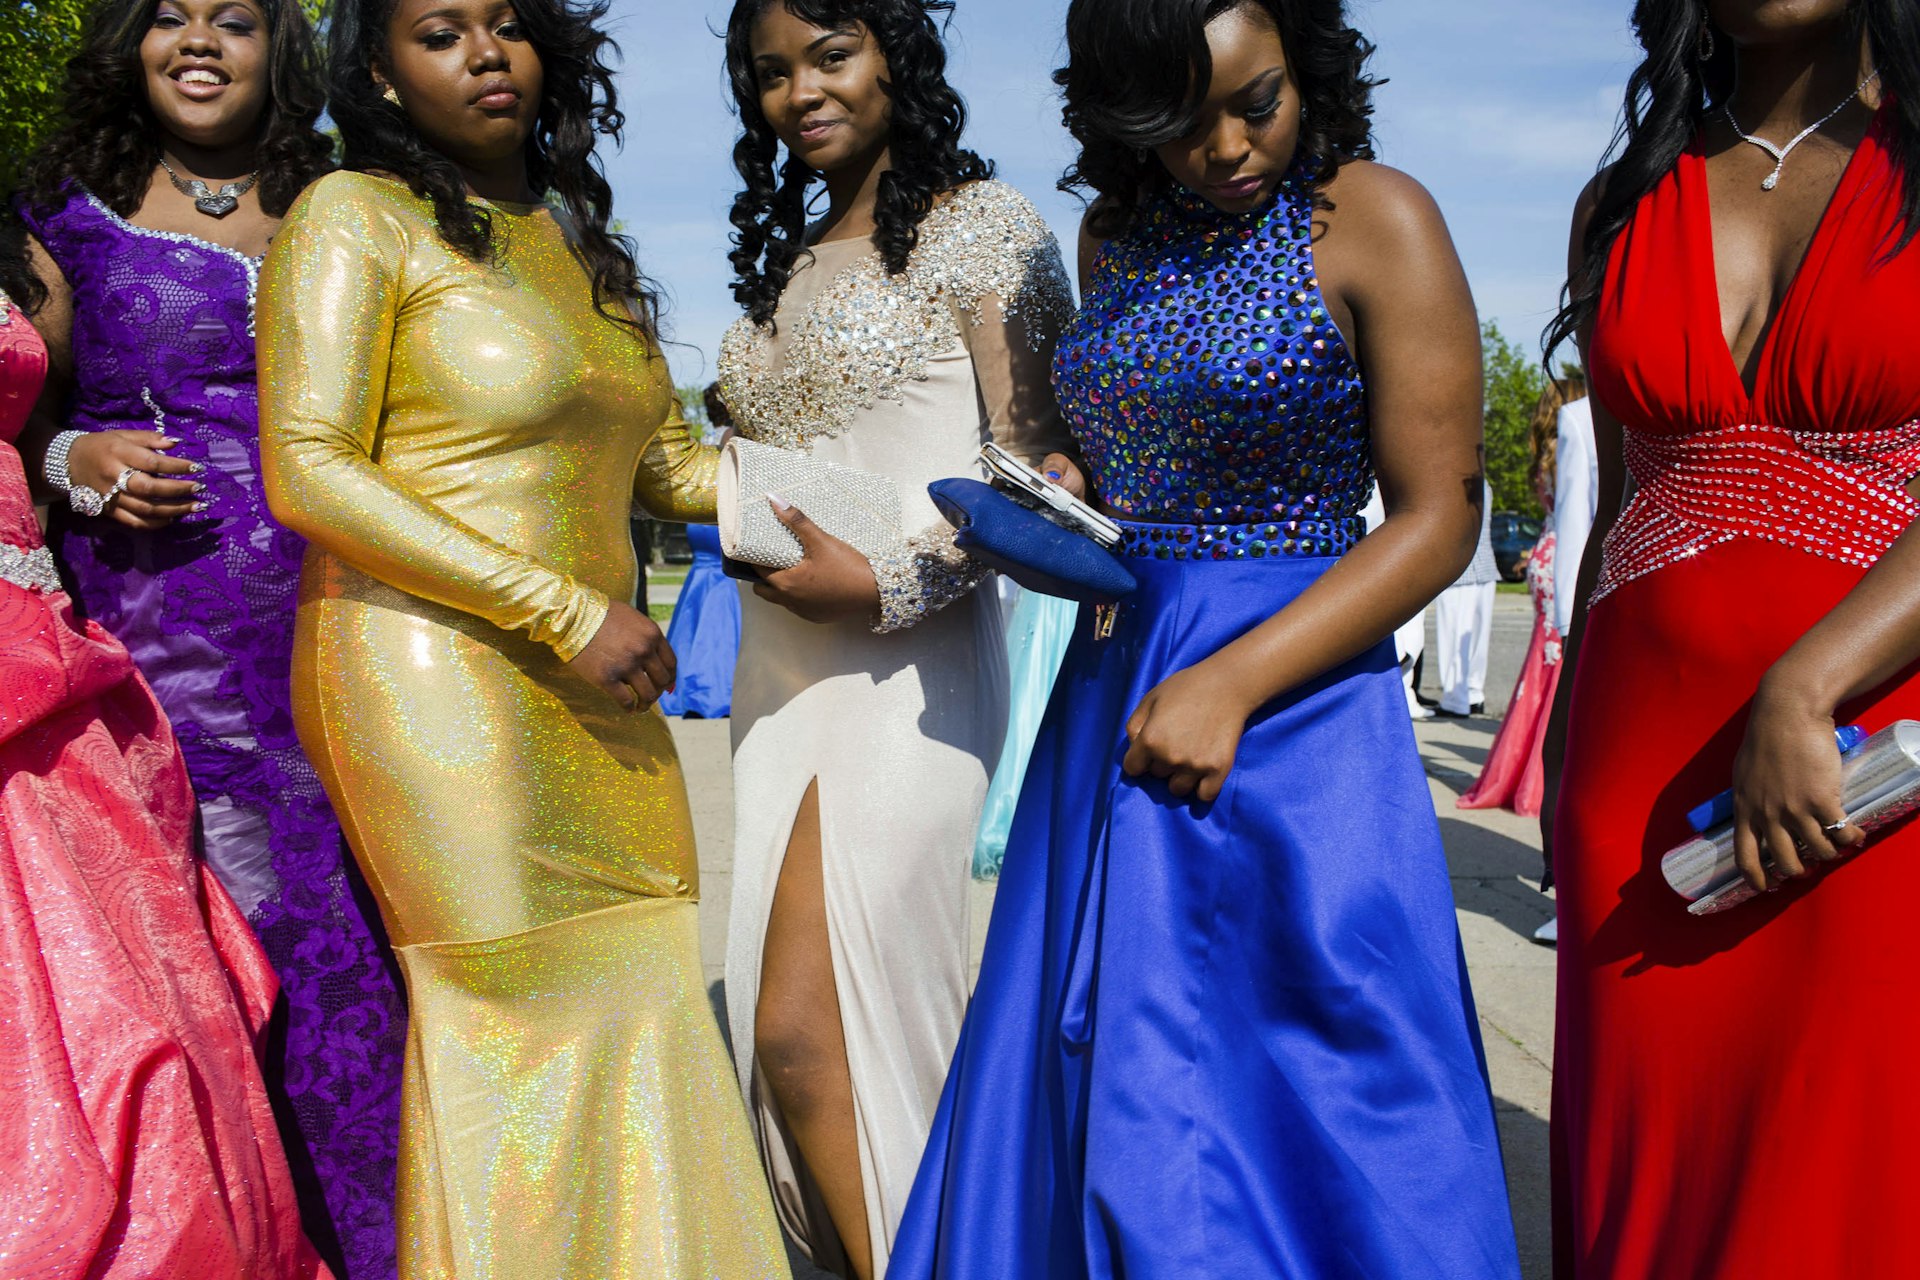 Northwestern High School students prepare for a group photo before their prom on Saturday, May 21, 2016 in Flint, Michigan. 